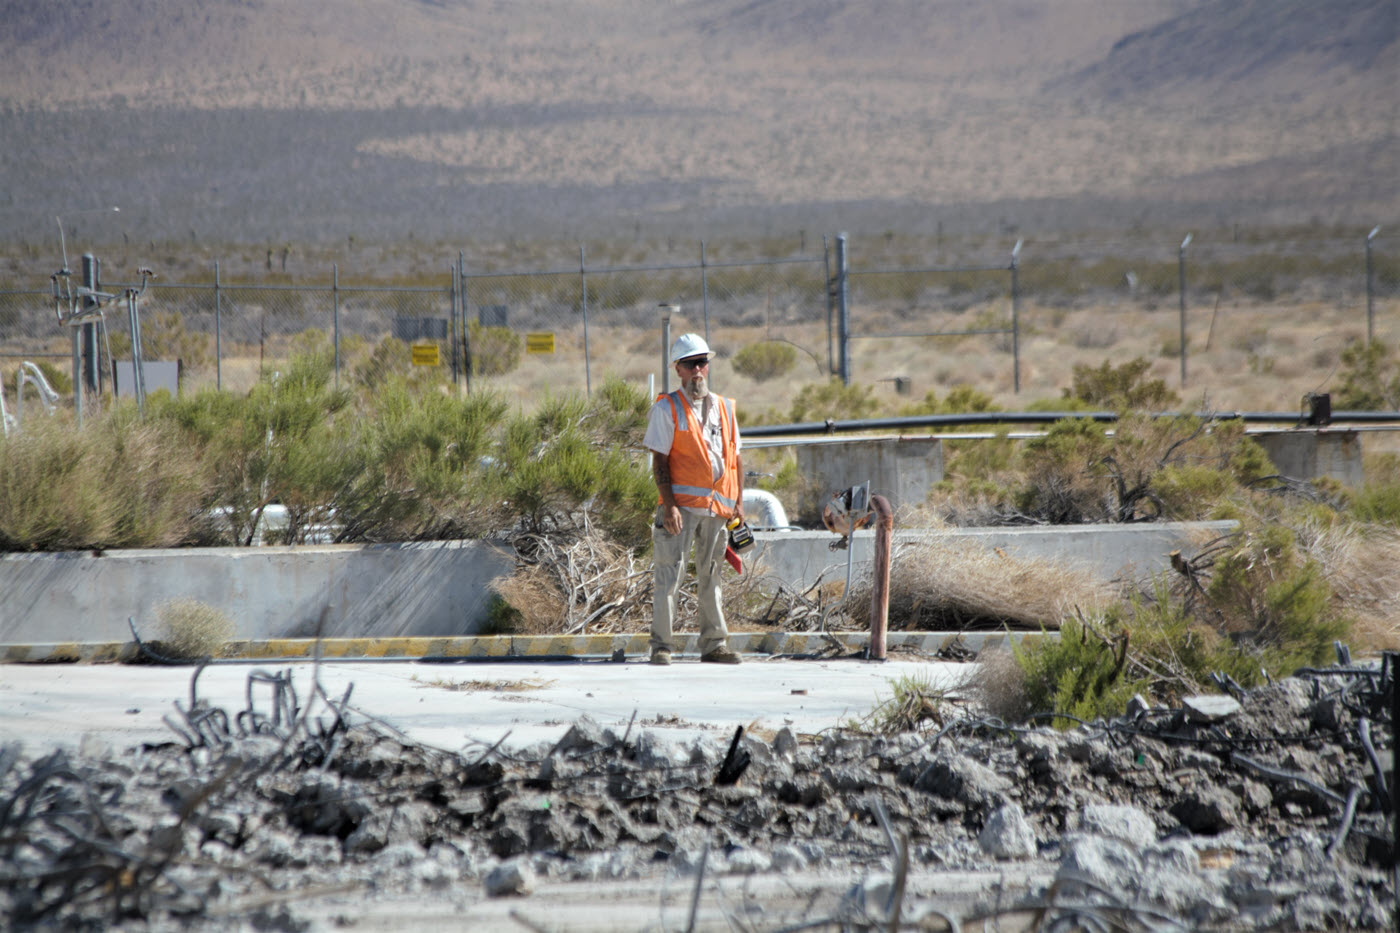 man in hard hat and orange vest standing on concrete pad surrounded by rubble in foreground and desert in background